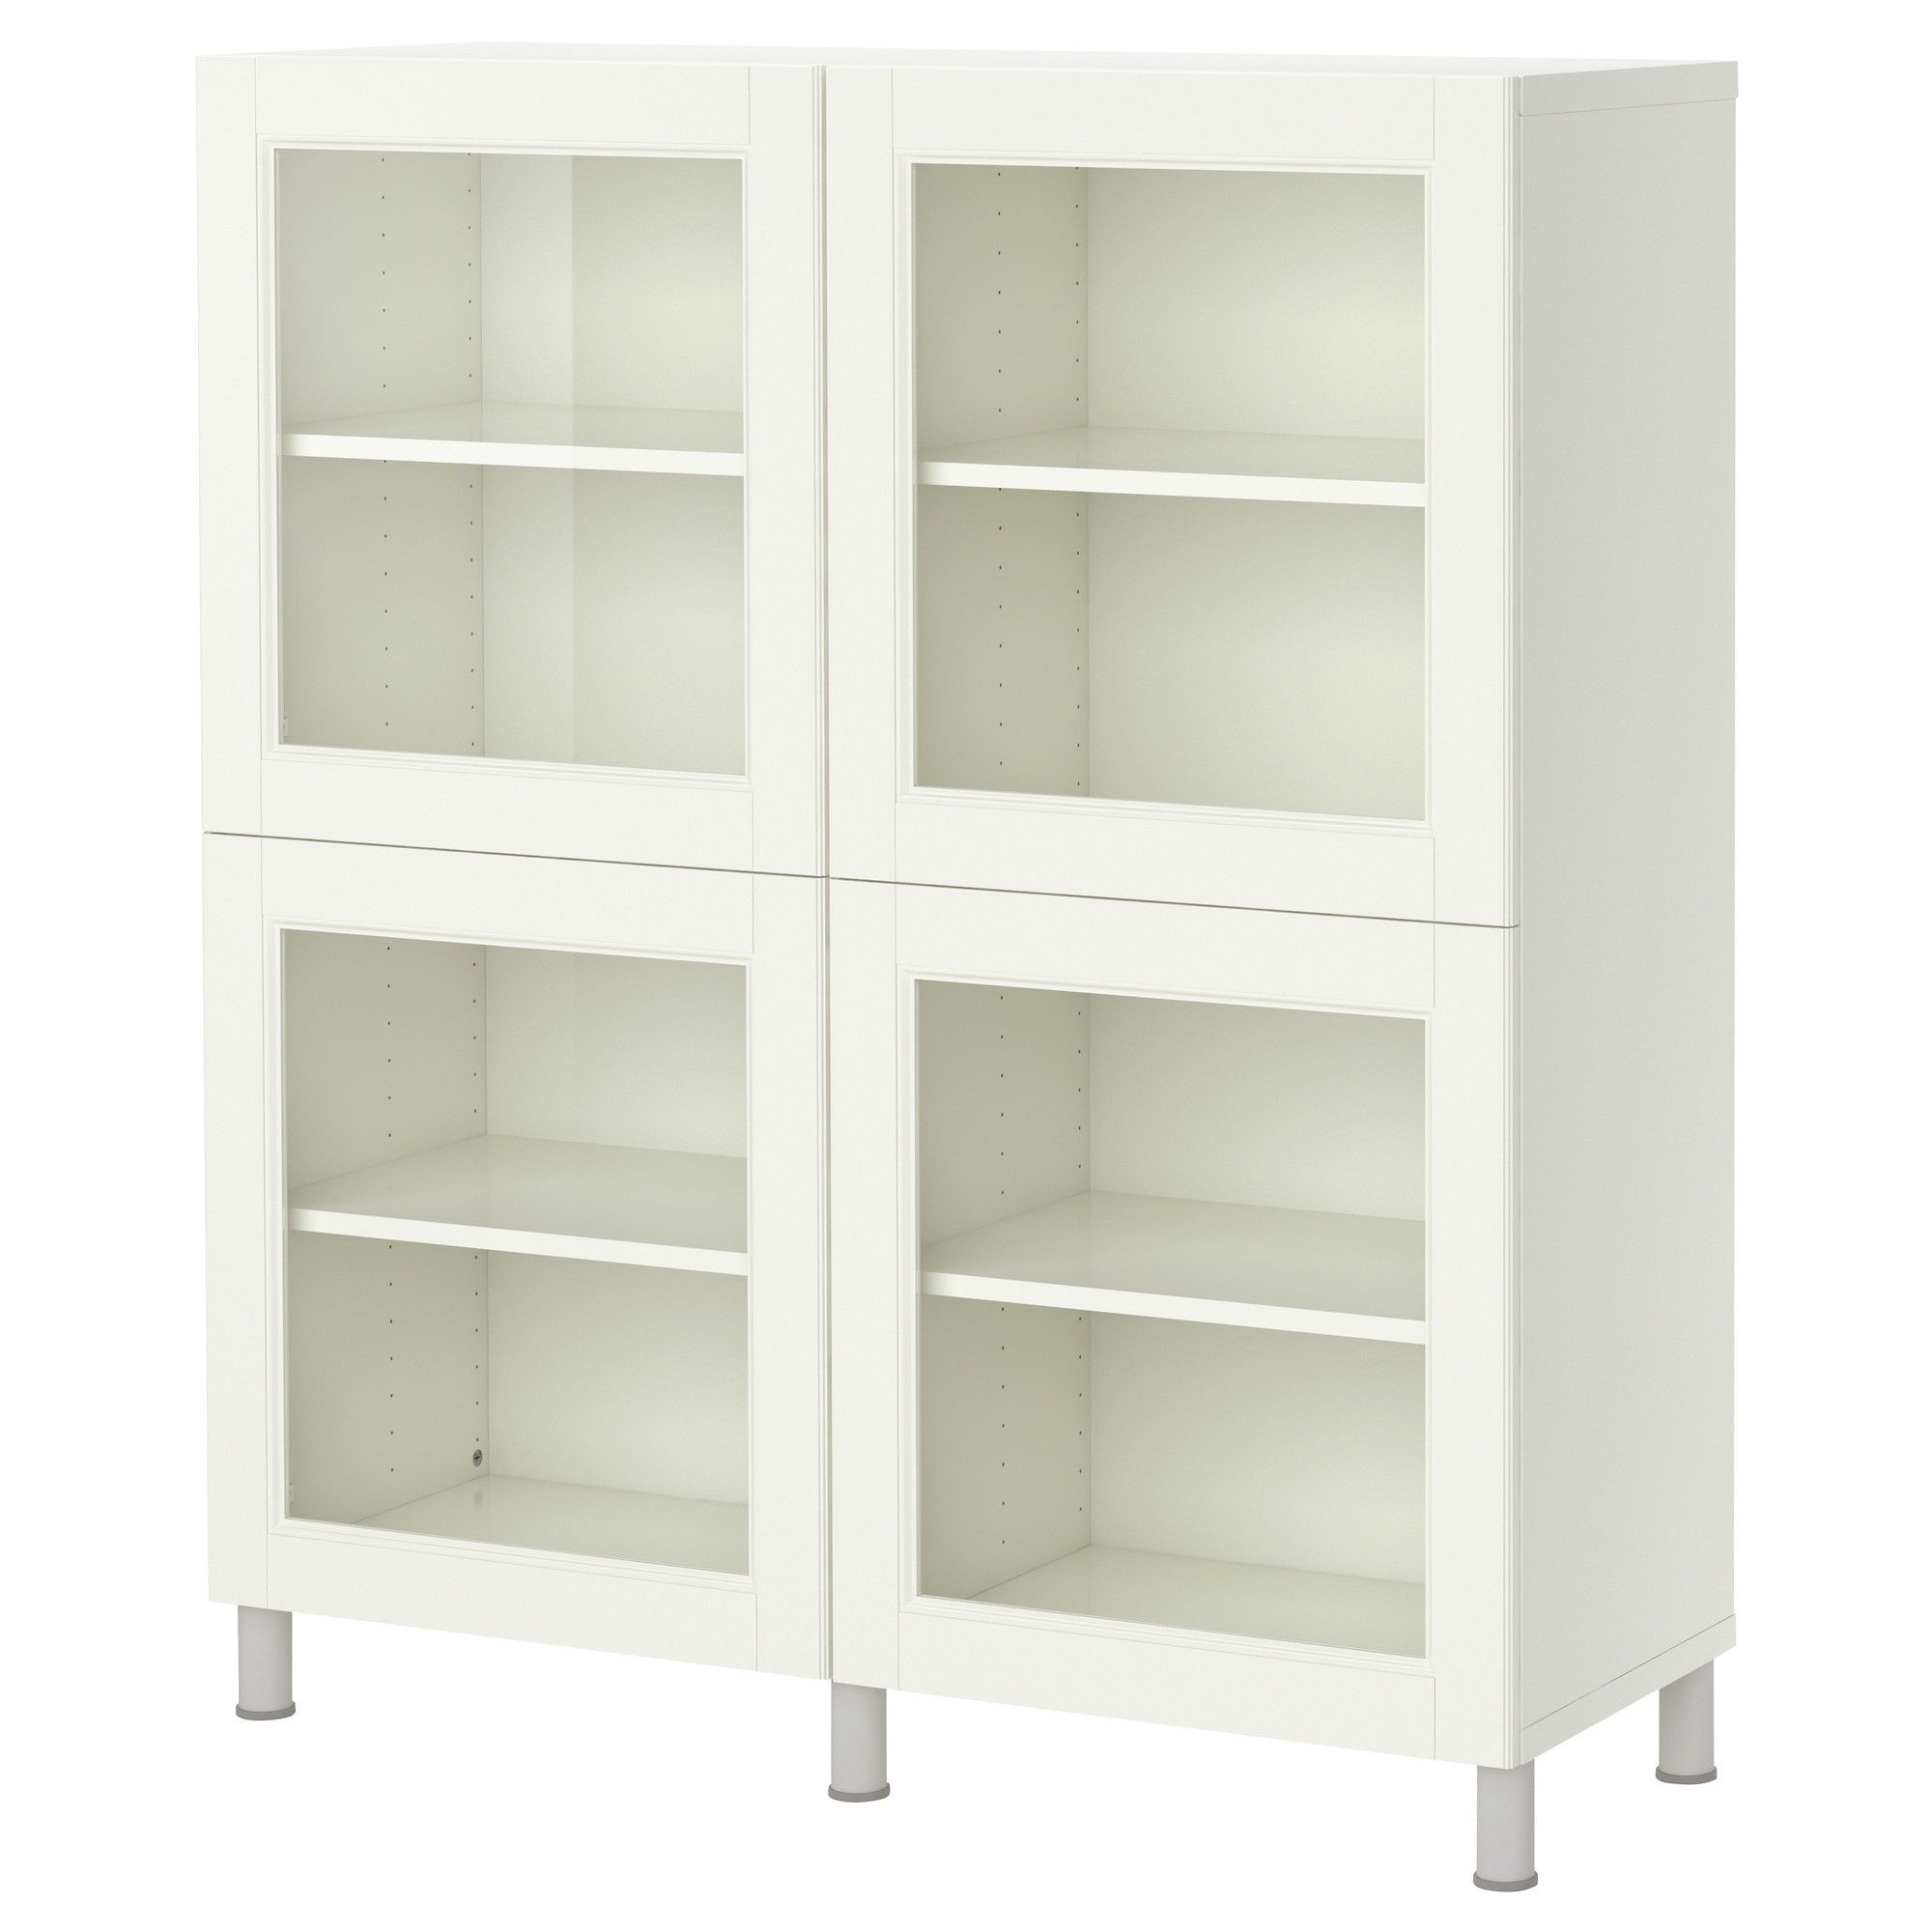 Us furniture and home furnishings glass shelving unit